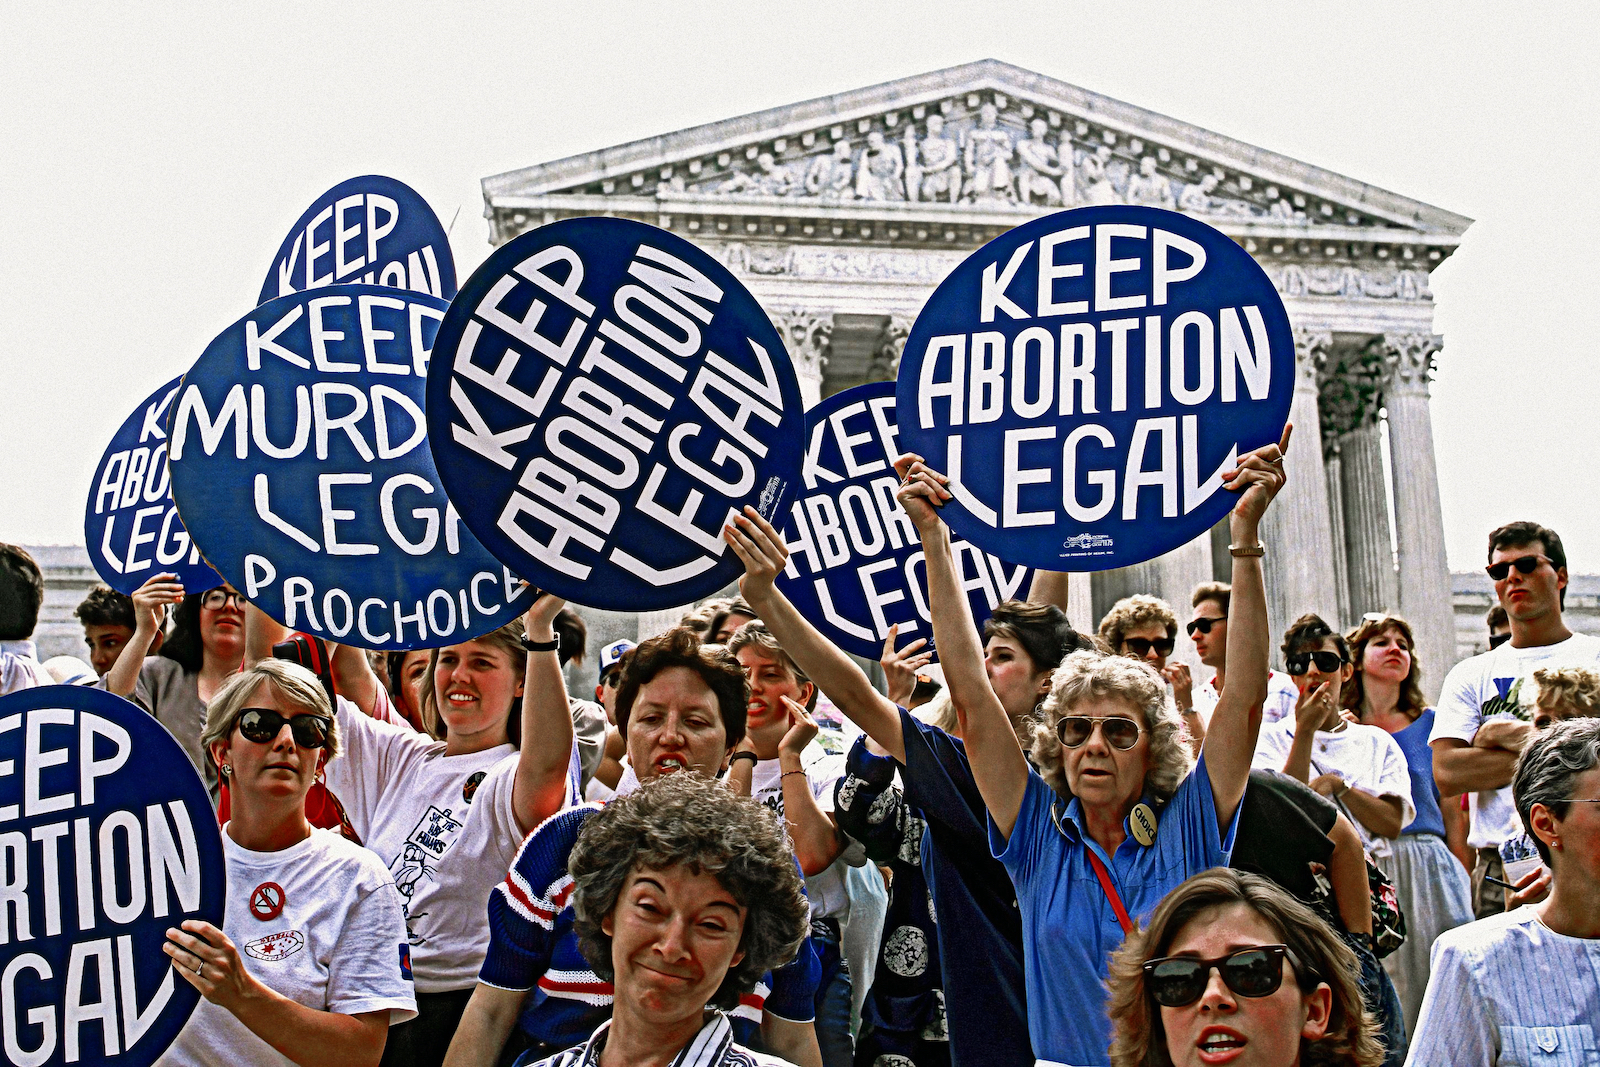 Abortion protest in 1989